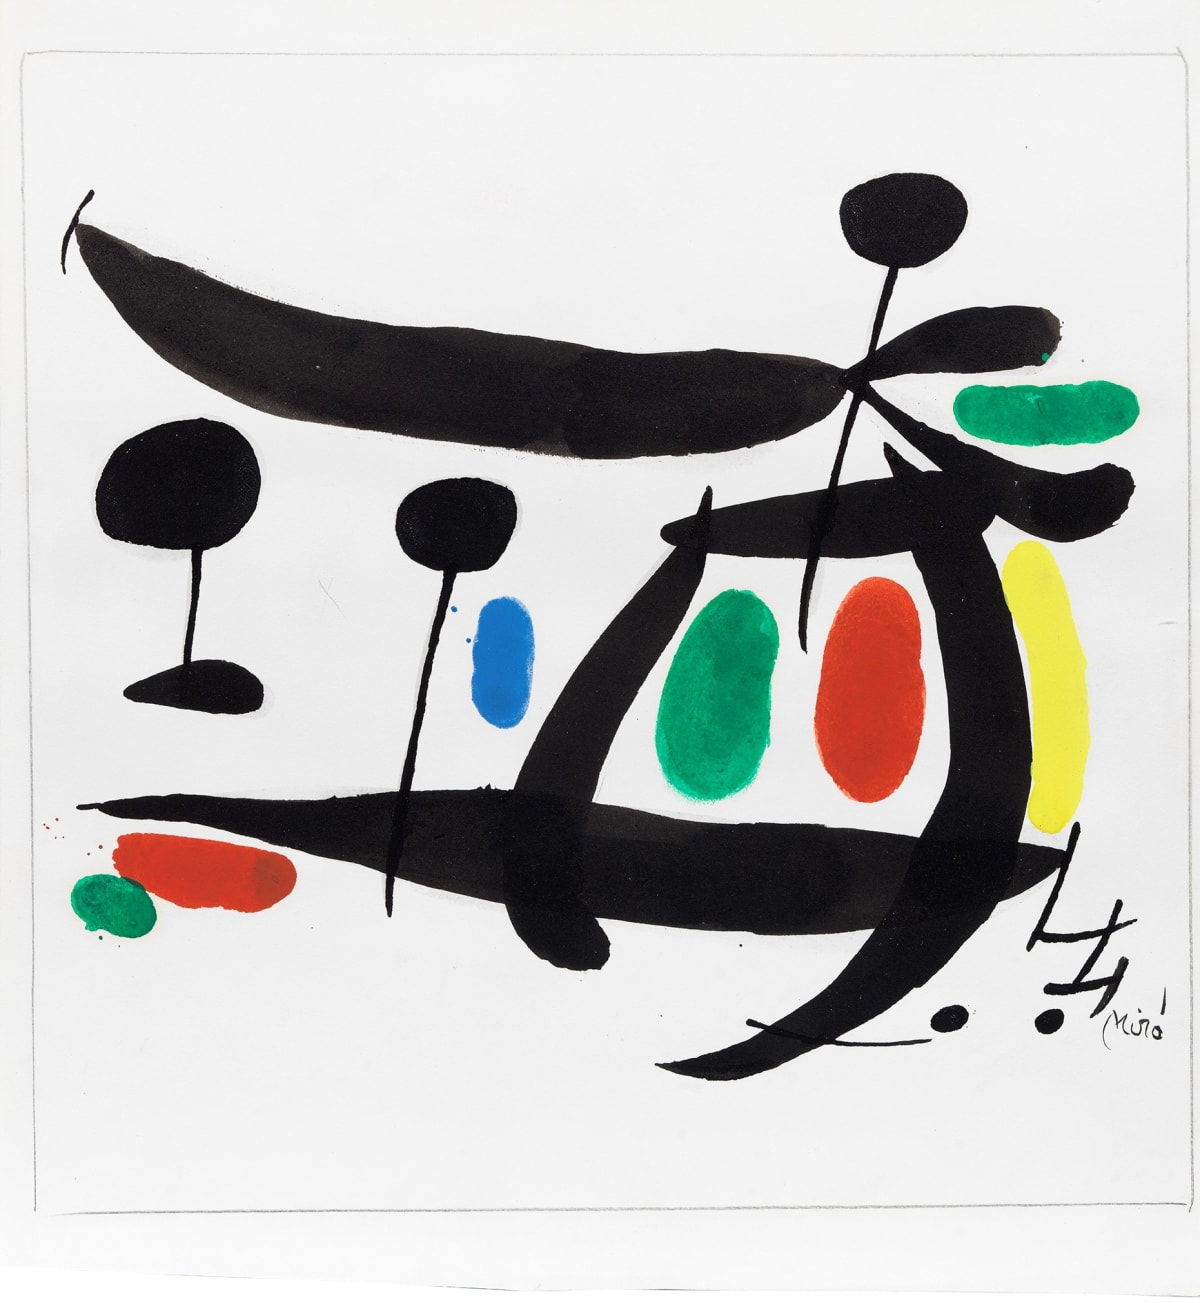 Joan Miró — The Poetry of Everyday Life] Talking about poetry in